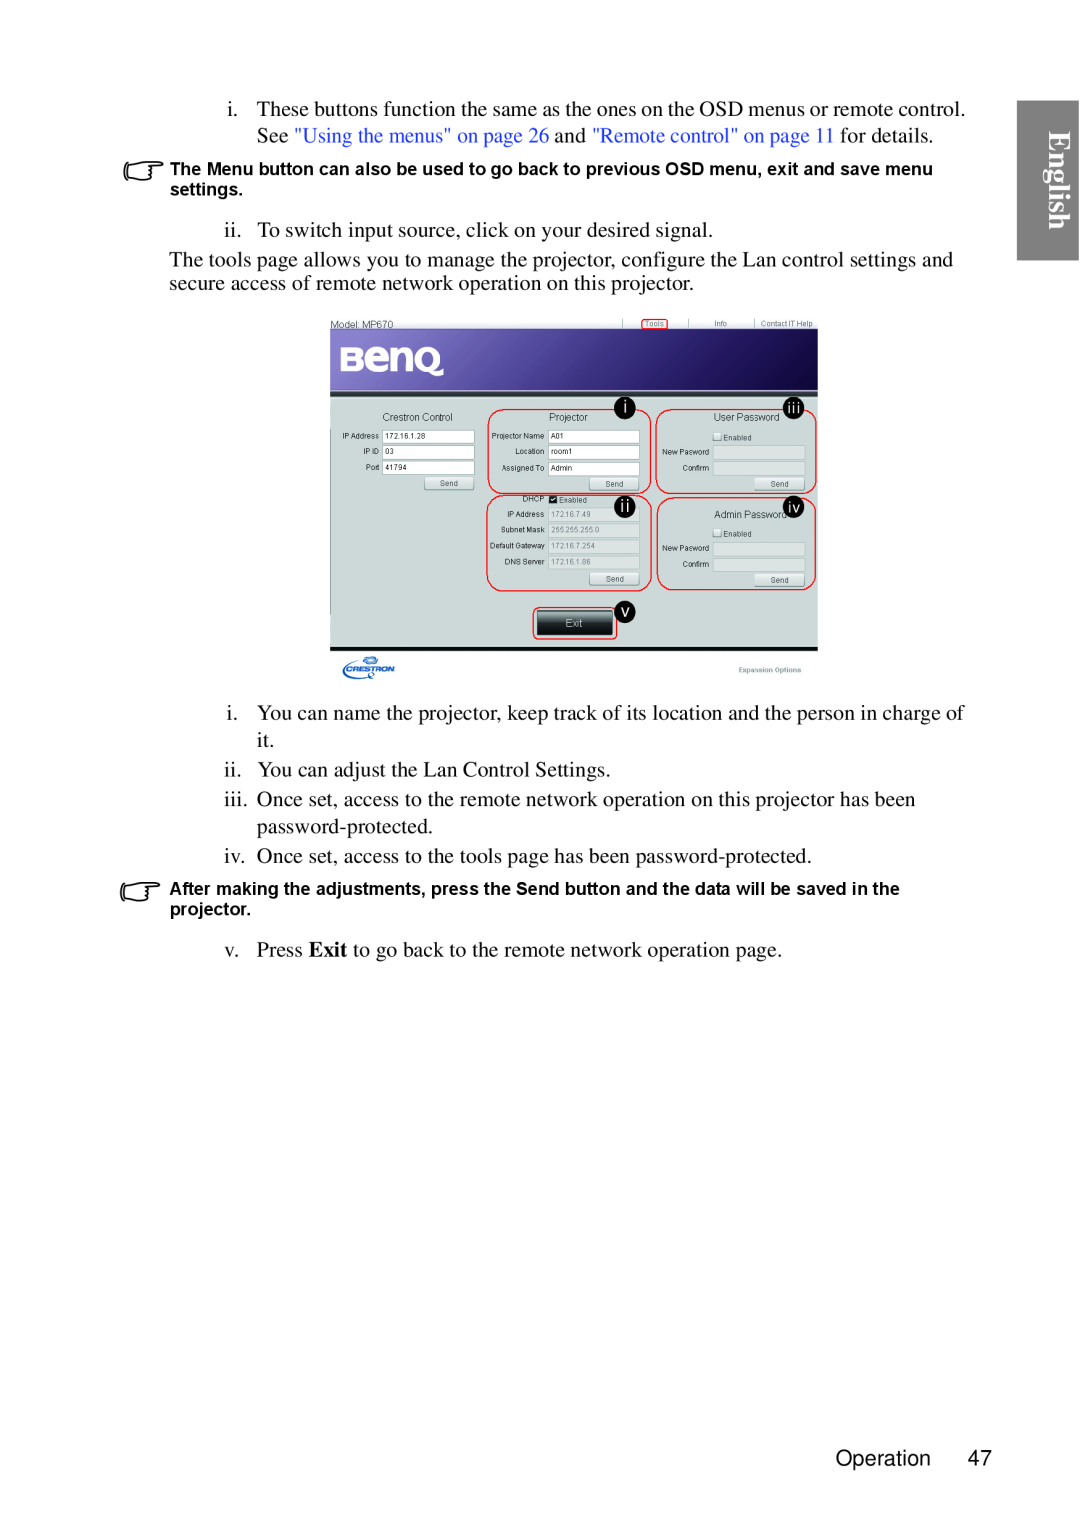 BenQ MP670 user manual English, ii. To switch input source, click on your desired signal 